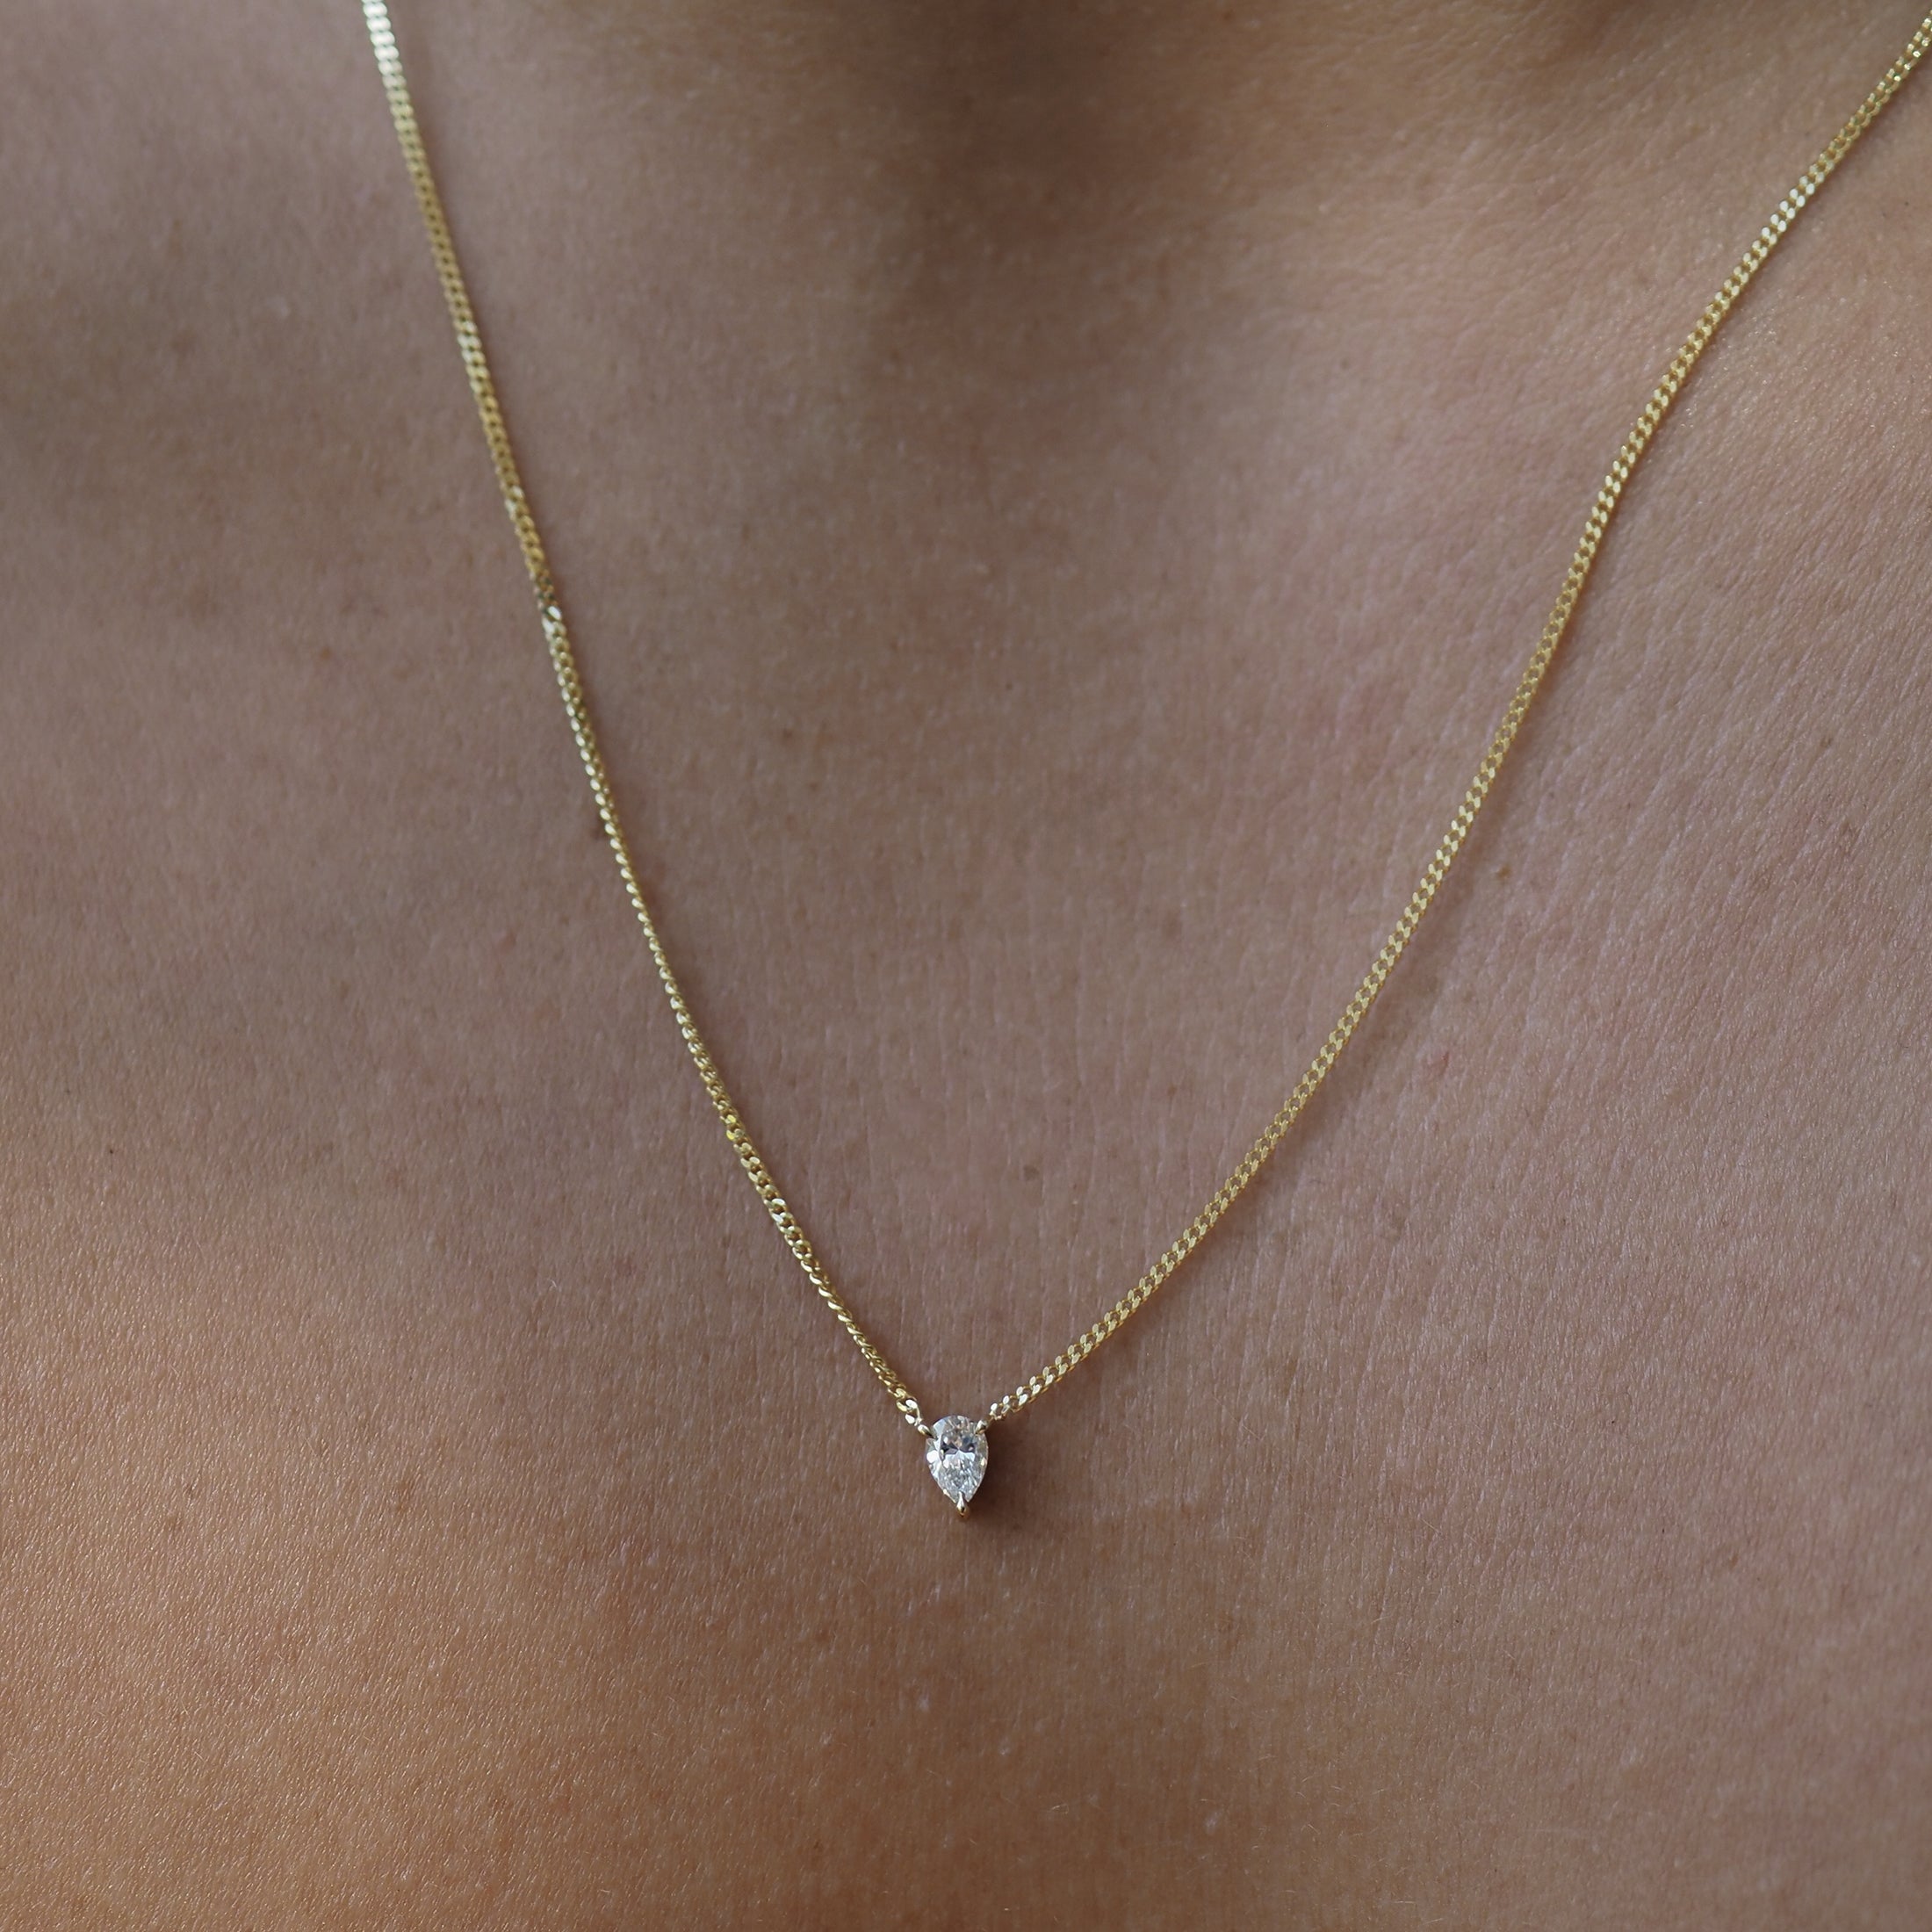 The Pear Diamond Necklace features a stunning lab-grown diamond handset within three claws, fixed along a yellow gold chain. 